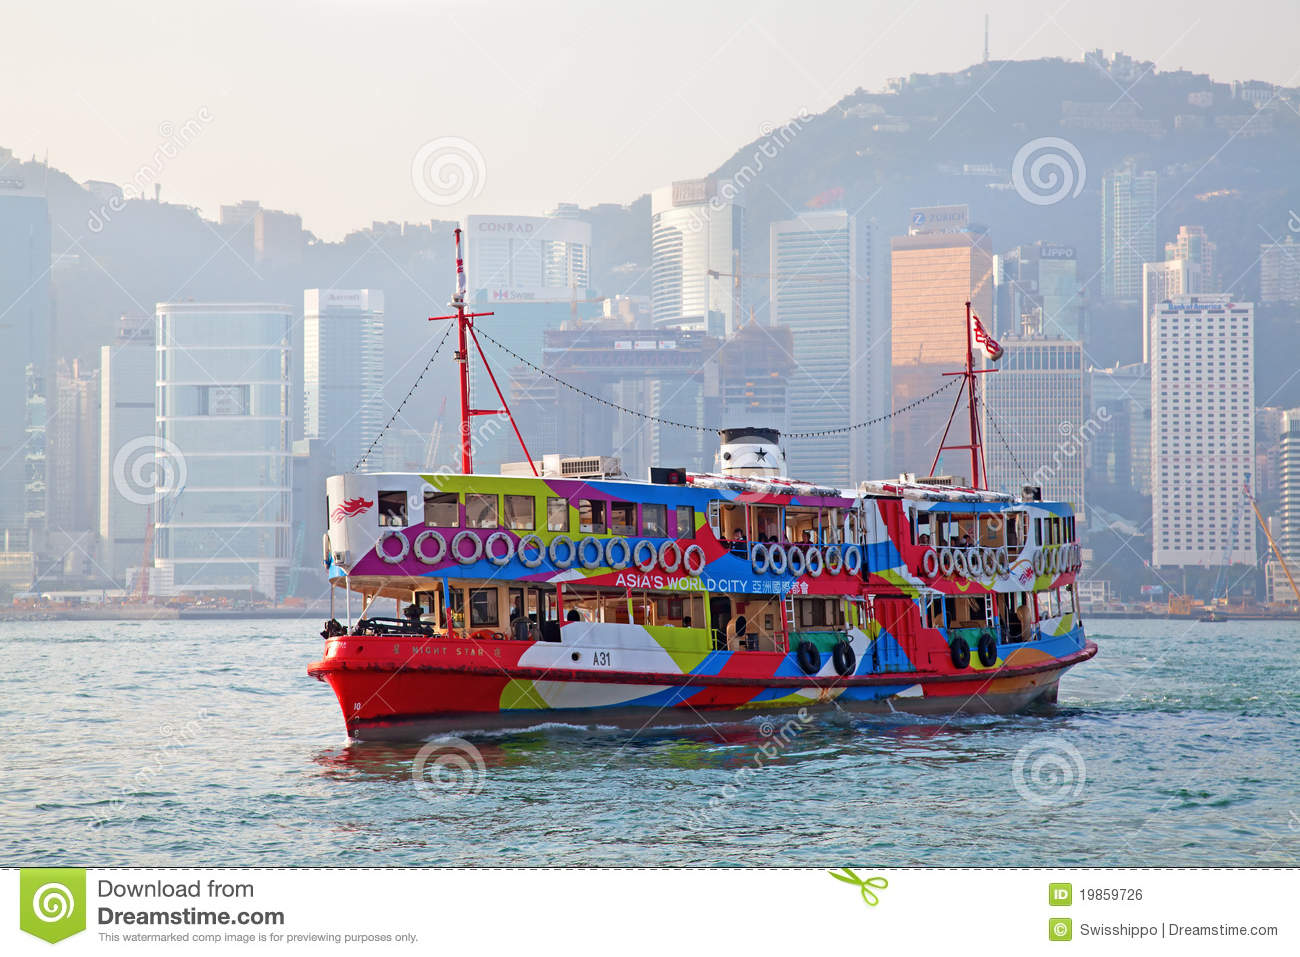 Hong Kong   December 3  Ferry Night Star Coming To Kowloon Pier On